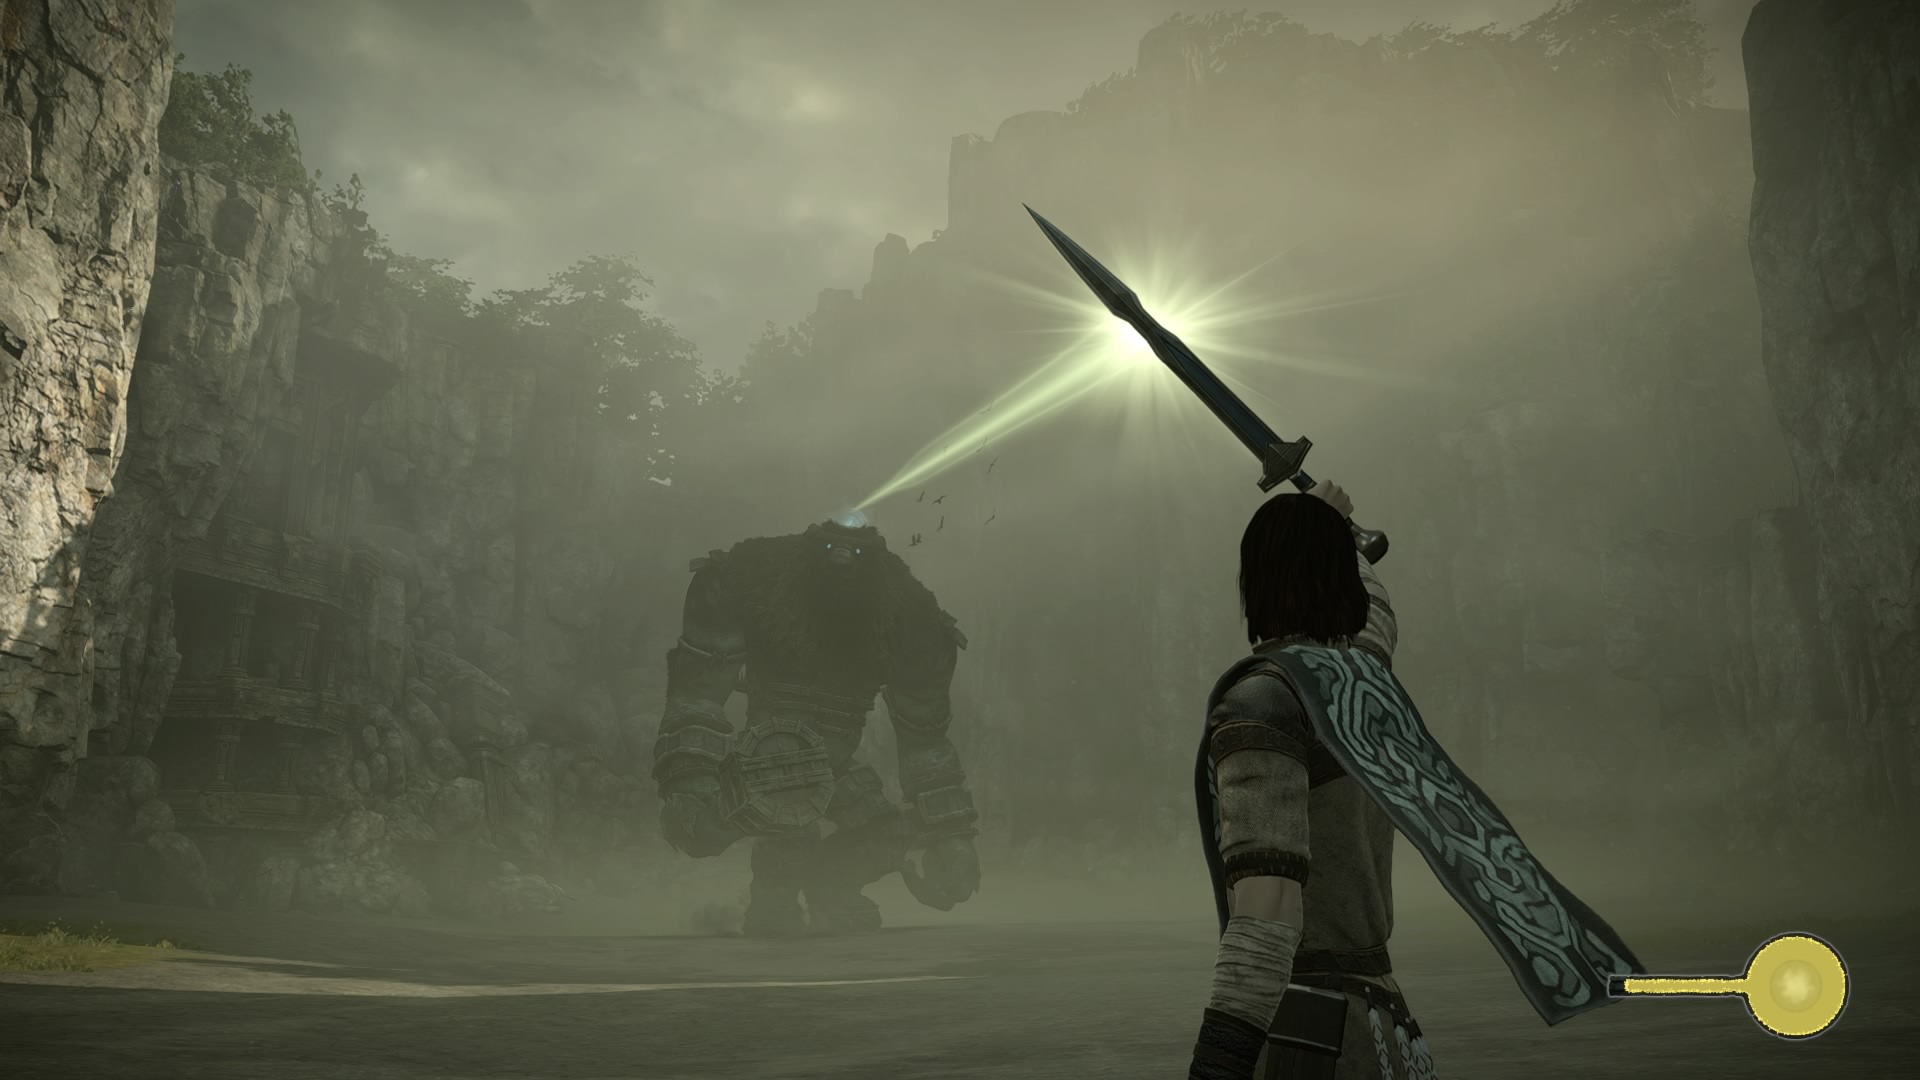 Shadow of the Colossus - Colossus 1 location and how to defeat the